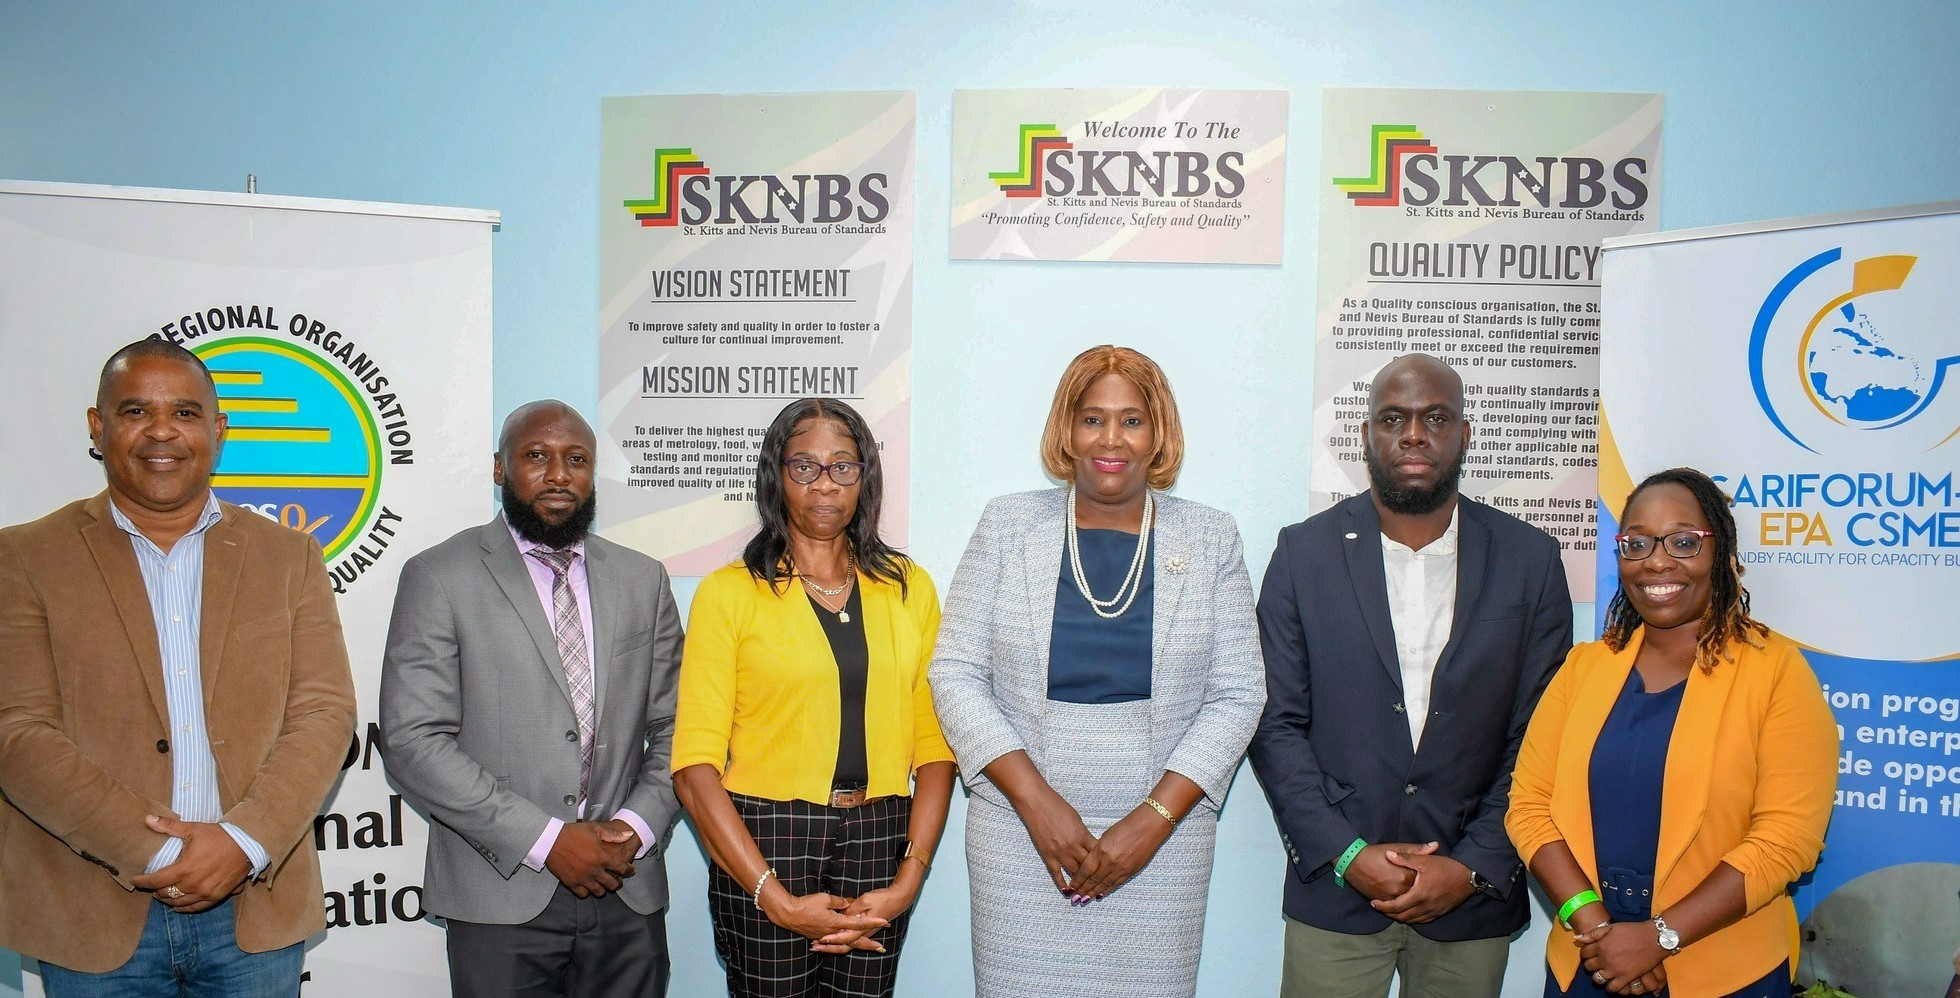 Left to right: Mr. Stuart Laplace, Director of St. Kitts and Nevis Bureau of Standards; Mr. Cyril Gil, Project Manager EPA & CSME Standby Facility; Mrs. Mentrice Warner-Arthurton, Director of Trade & Consumer Affairs (Nevis); Mrs. Jasemine Weekes, Permanent Secretary in the Ministry of Trade; Mr. Dale Phoenix, Results Officer EPA & CSME Standby Facility, Mrs. Sadie-Ann Sisnett, Project Coordinator, CARICOM Regional Organisation for Standards and Quality (CROSQ)